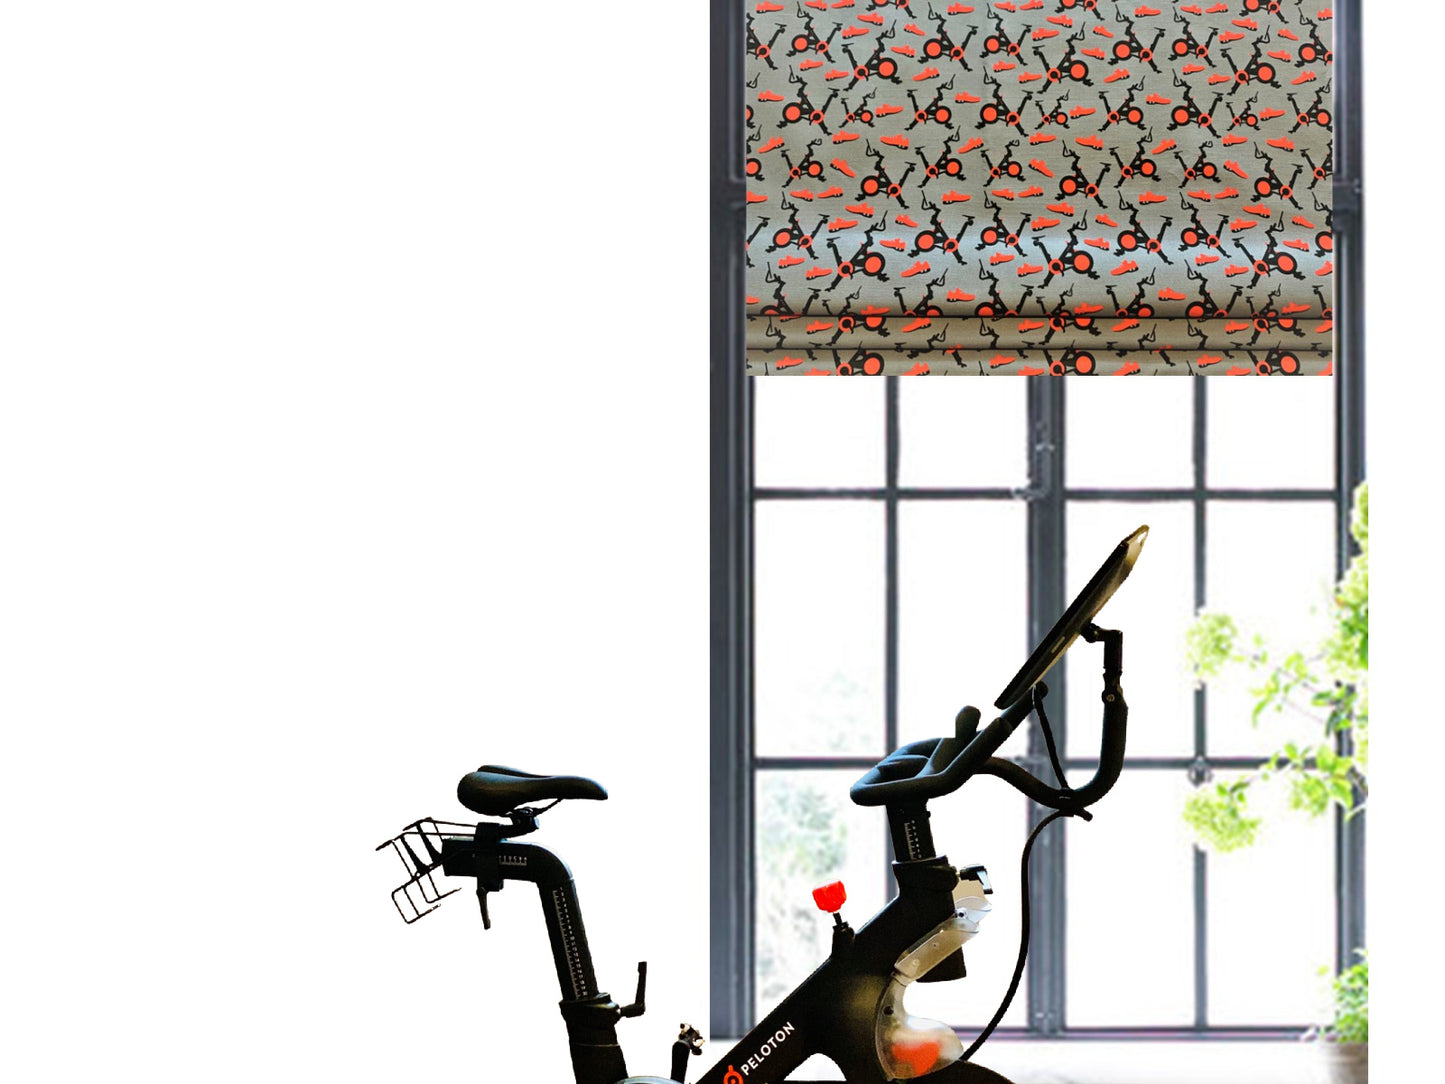 Custom Made Faux Roman Shade Valance in Pelo Bike and Shoes Pattern in Premium Cotton Linen Fabric, Fully Lined Grey or Red